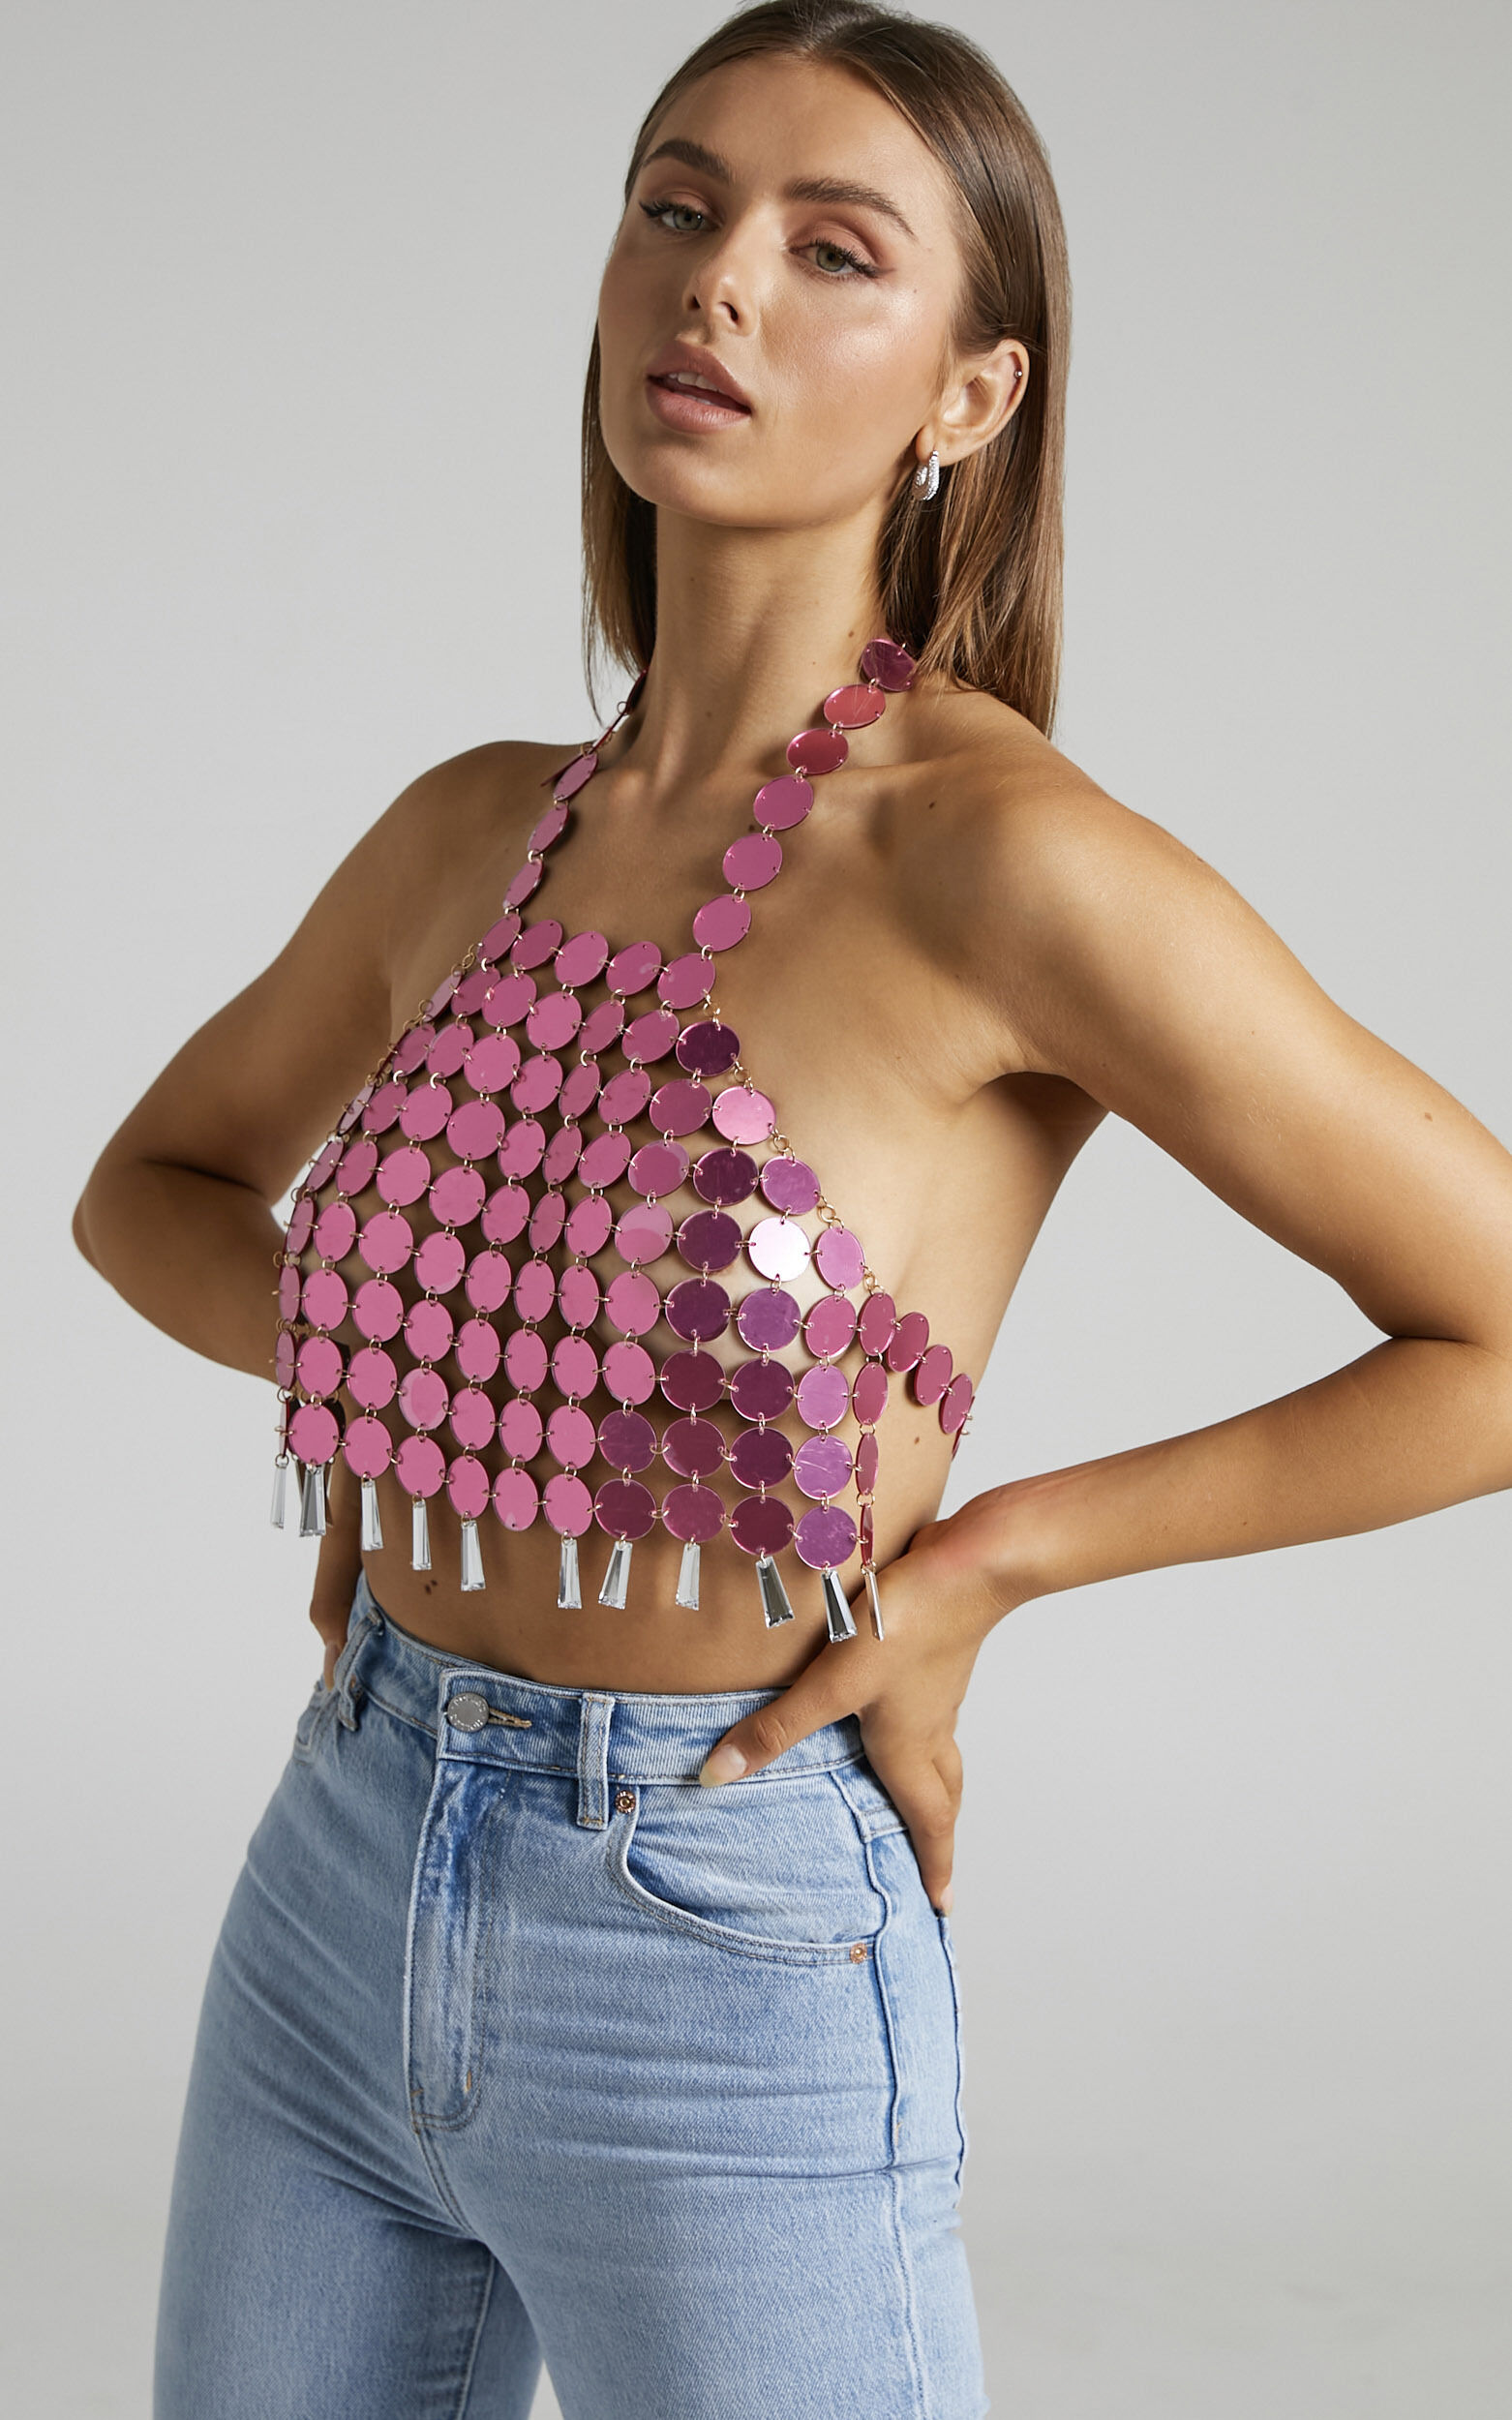 Visions Sequin Cropped Top in Pink - S/M, PNK1, super-hi-res image number null